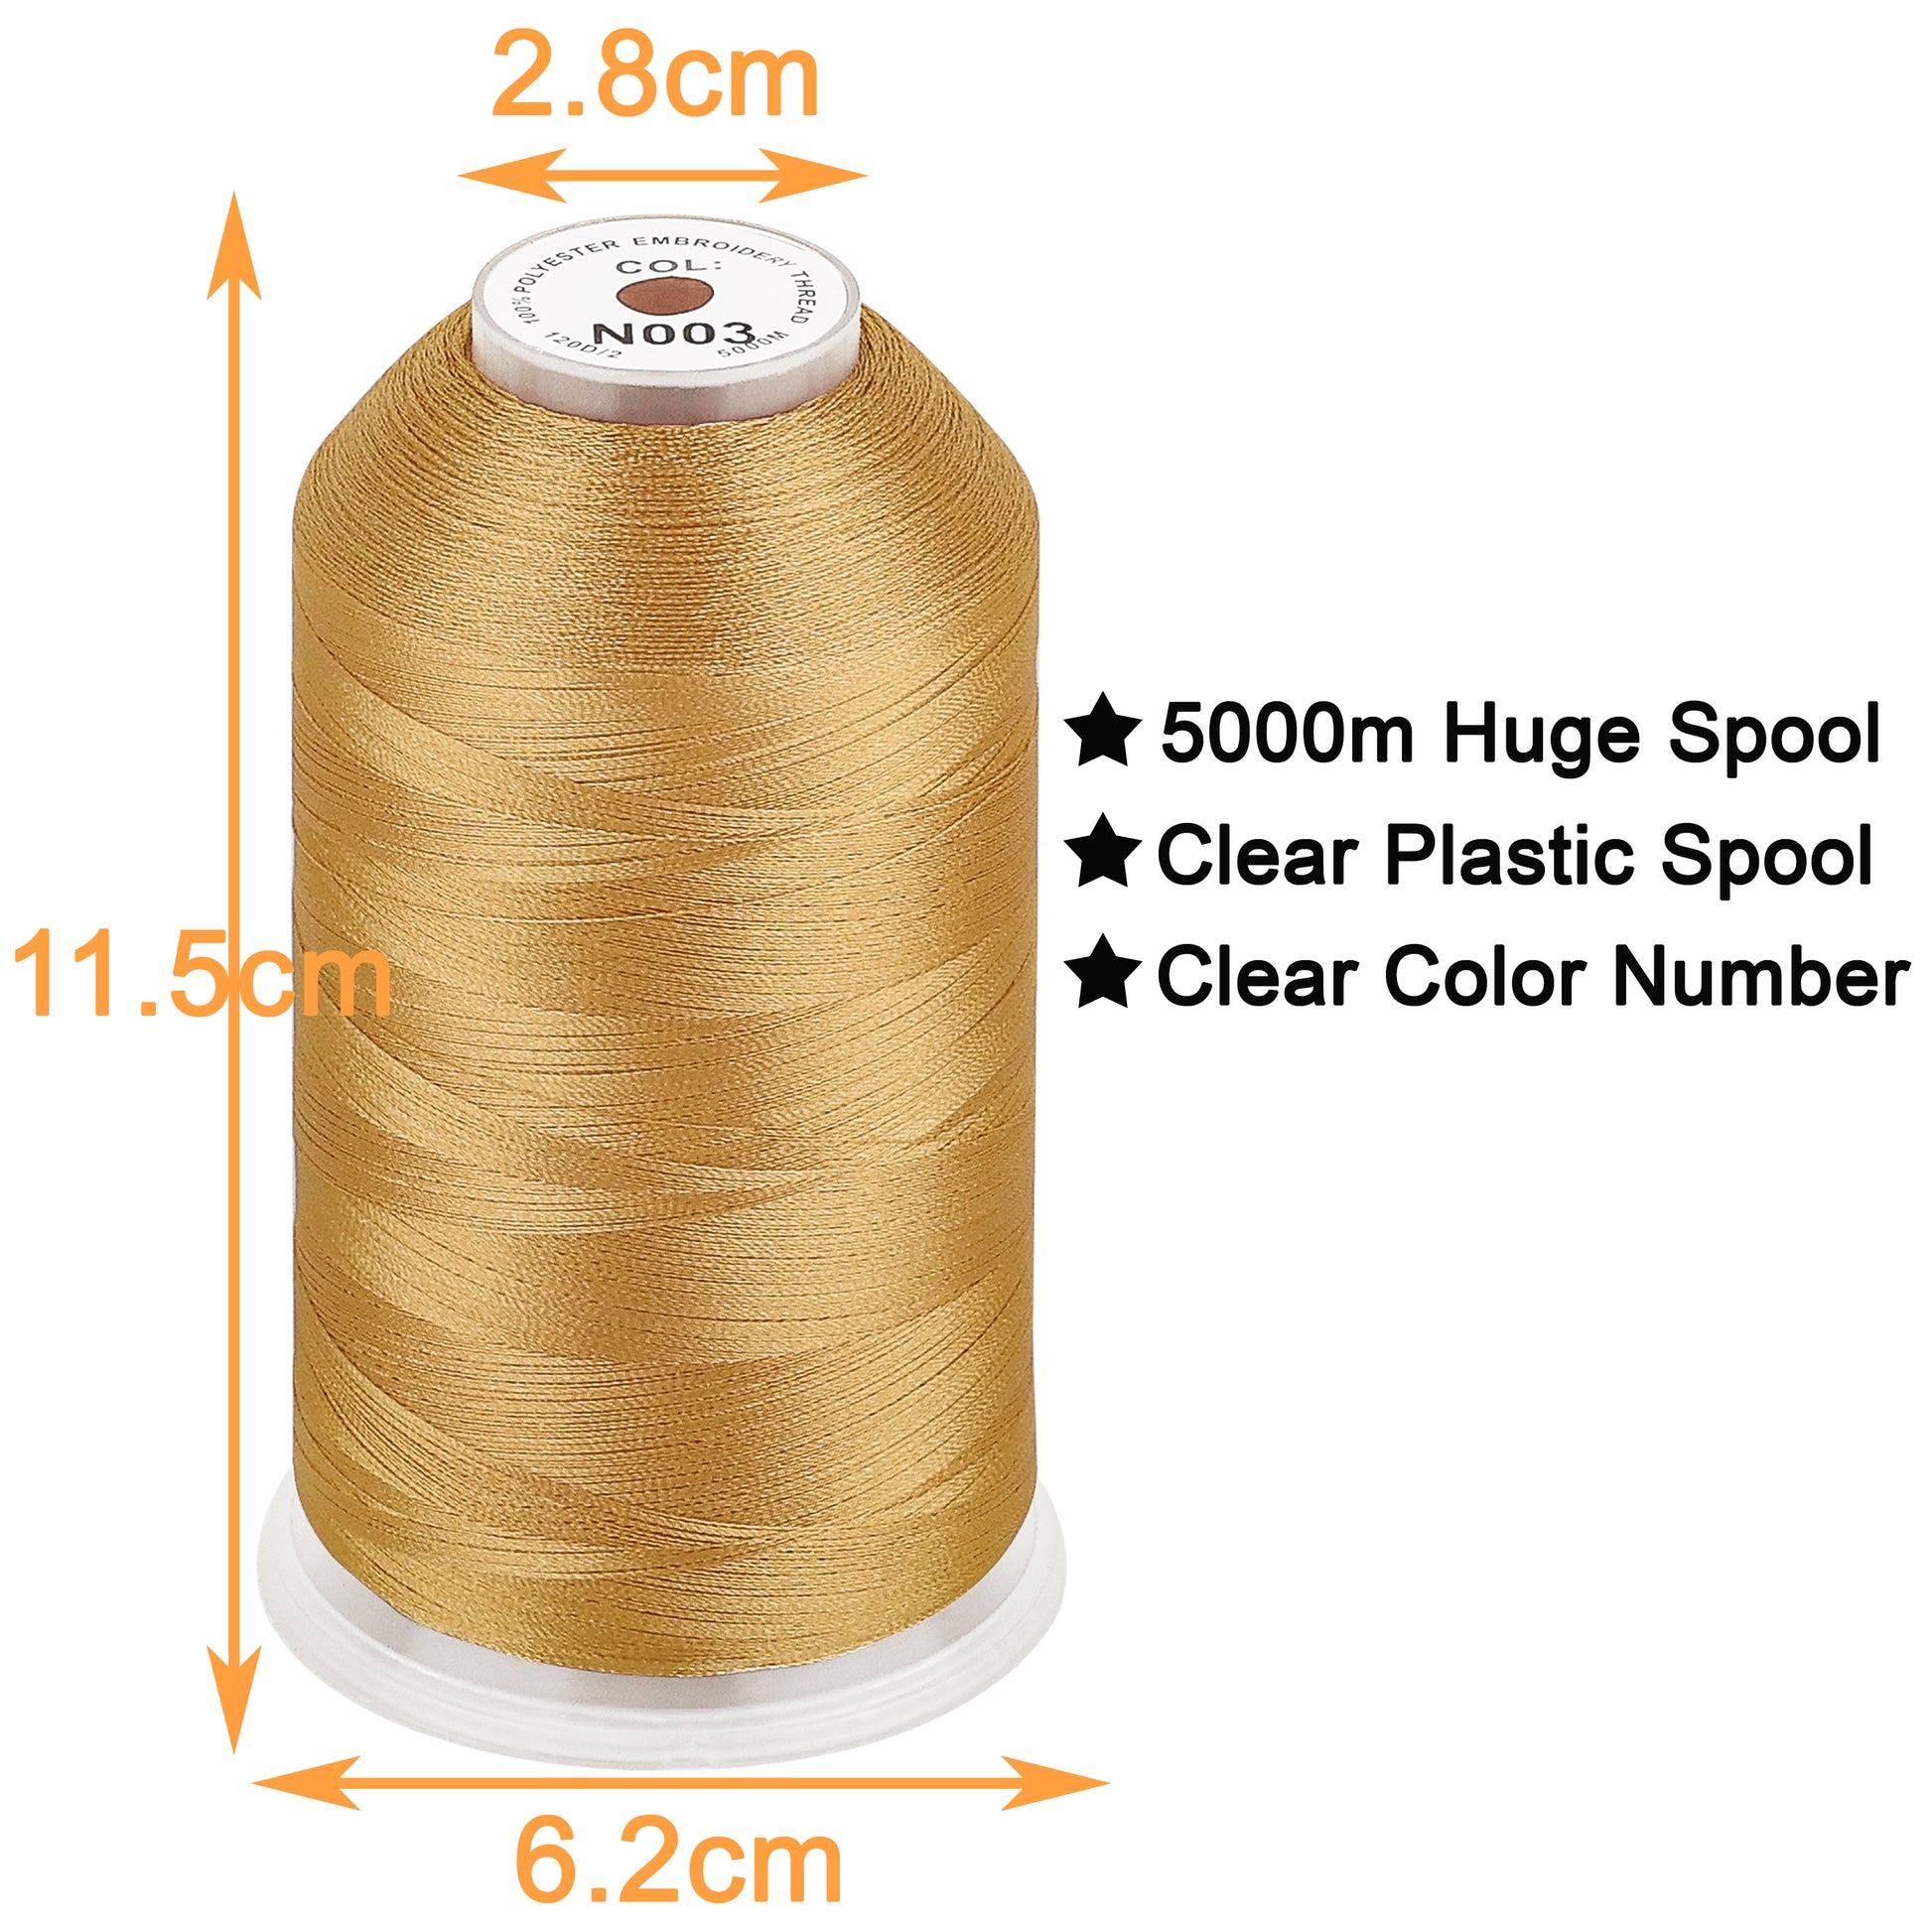 New brothread 64 Spools 1000M (1100Y) Polyester Embroidery Machine Thread Kit for Professional Embroiderer and Beginner